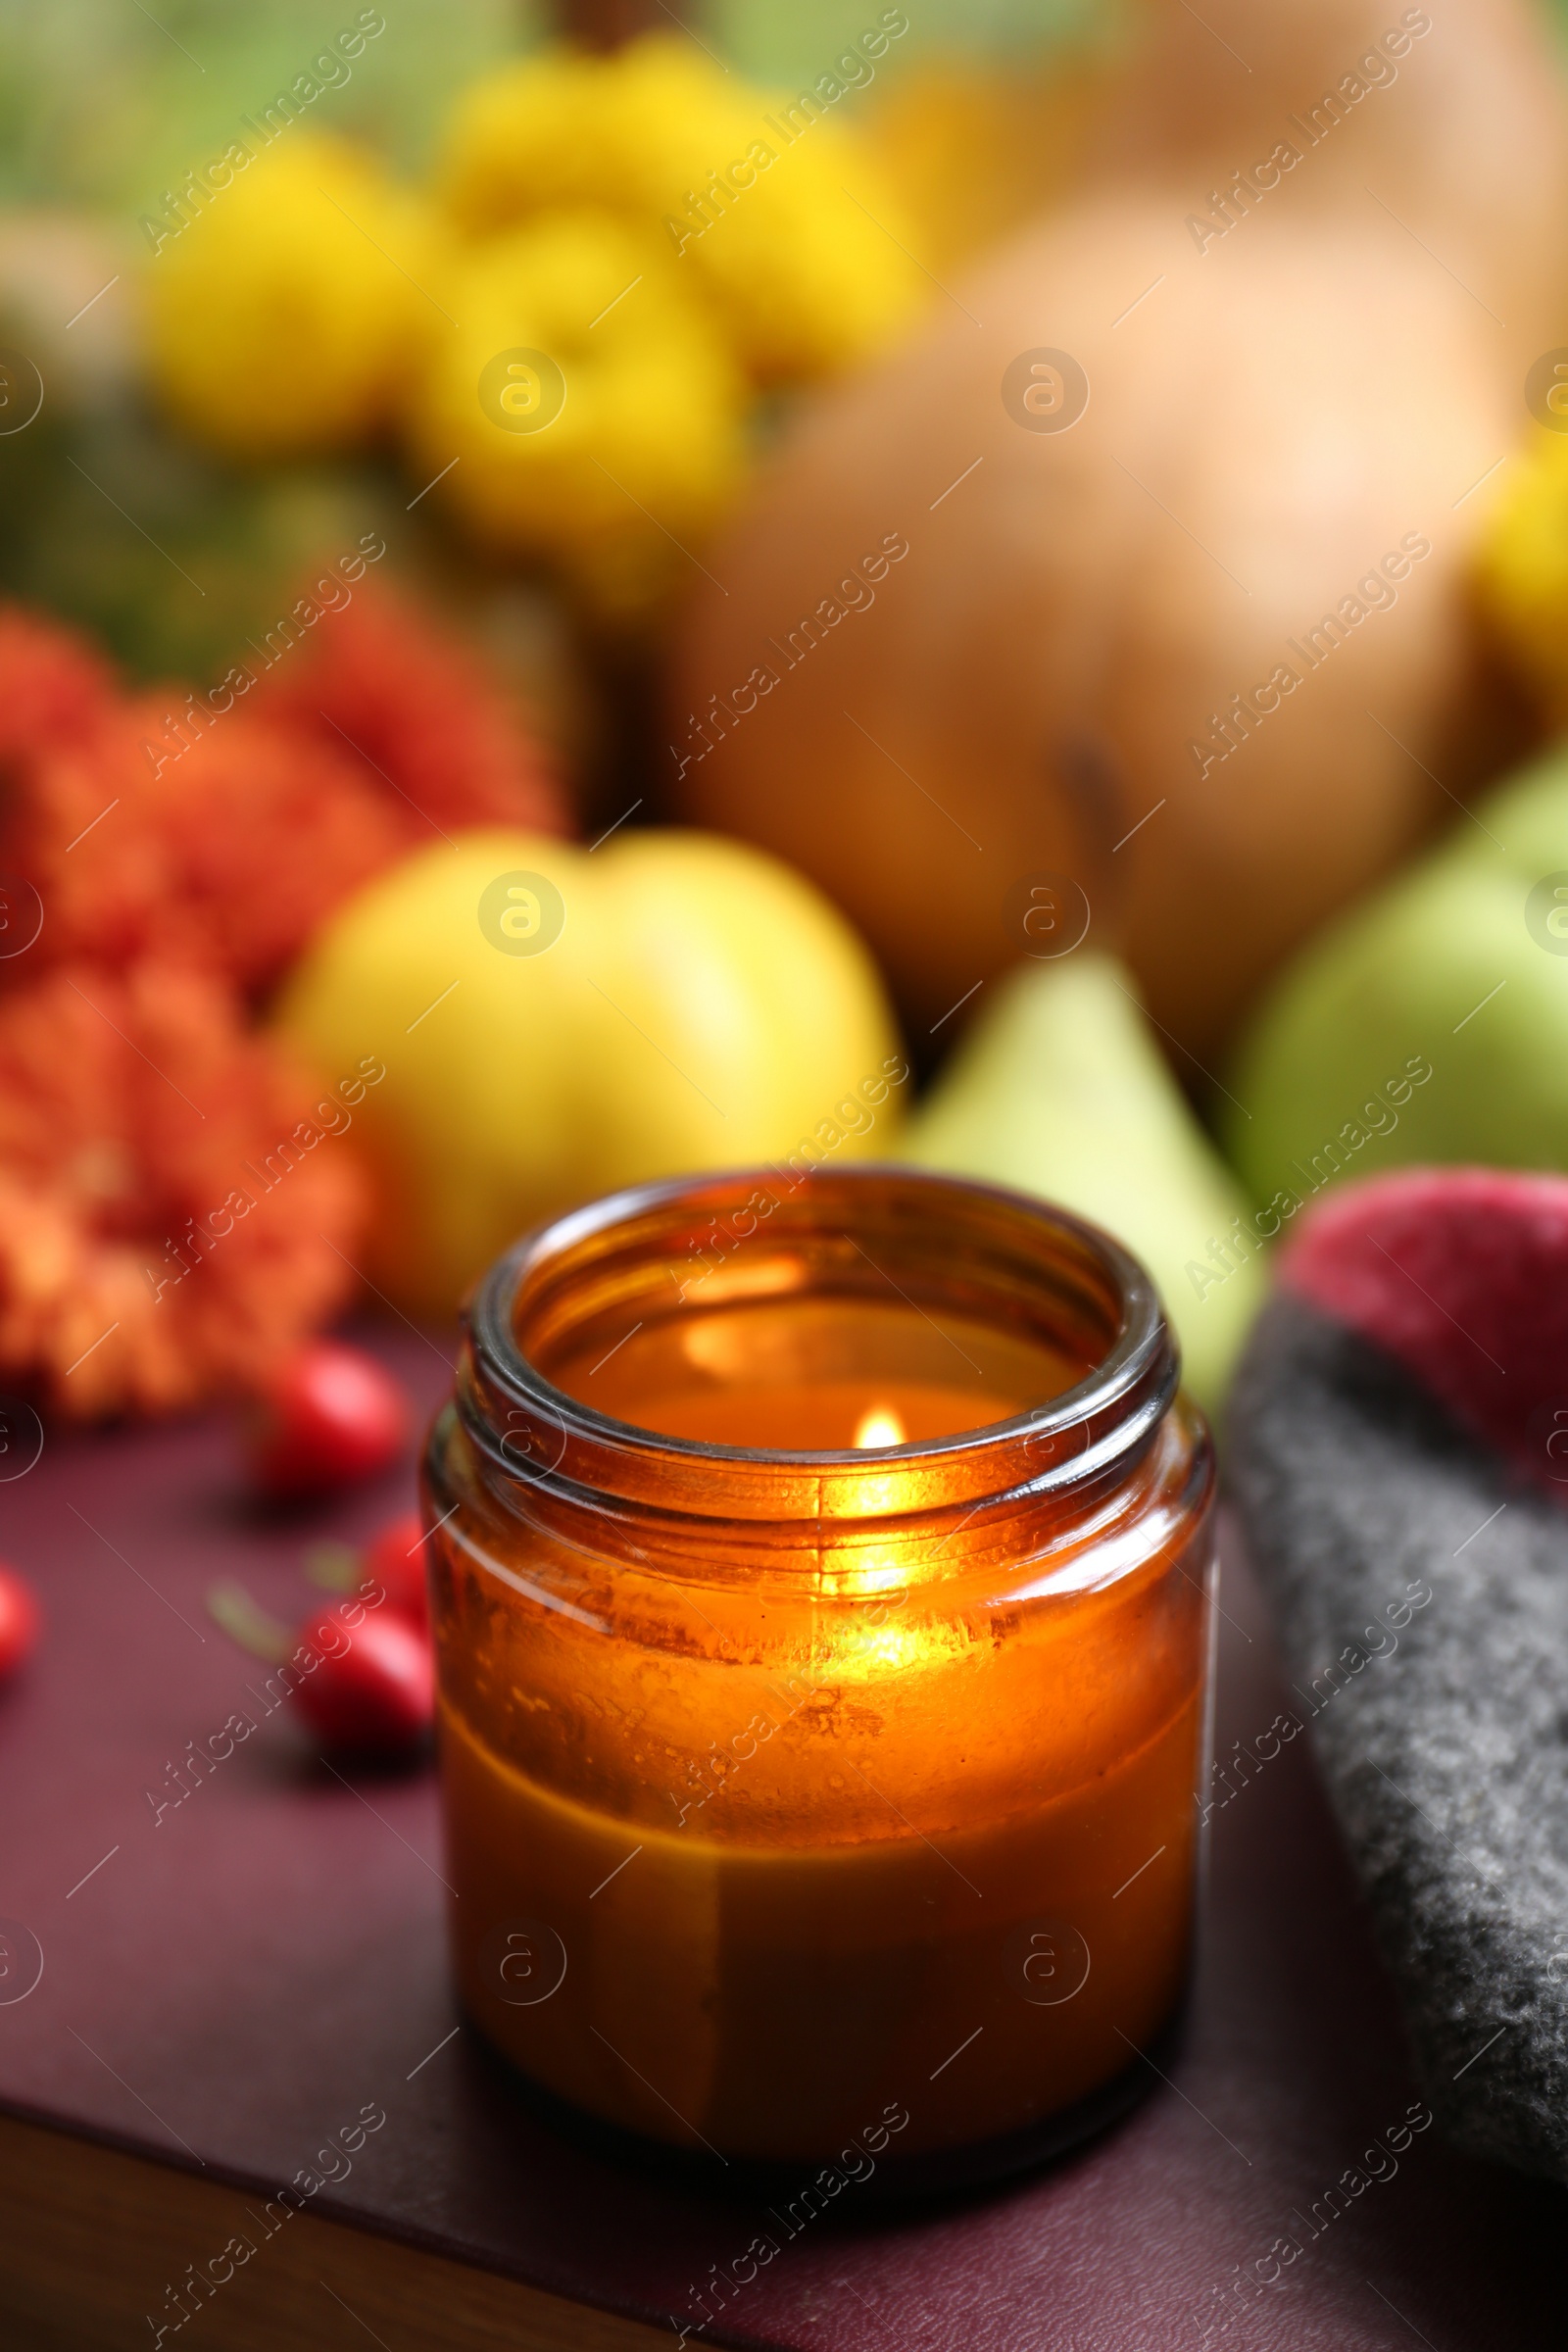 Photo of Burning scented candle on book, closeup with space for text. Autumn season